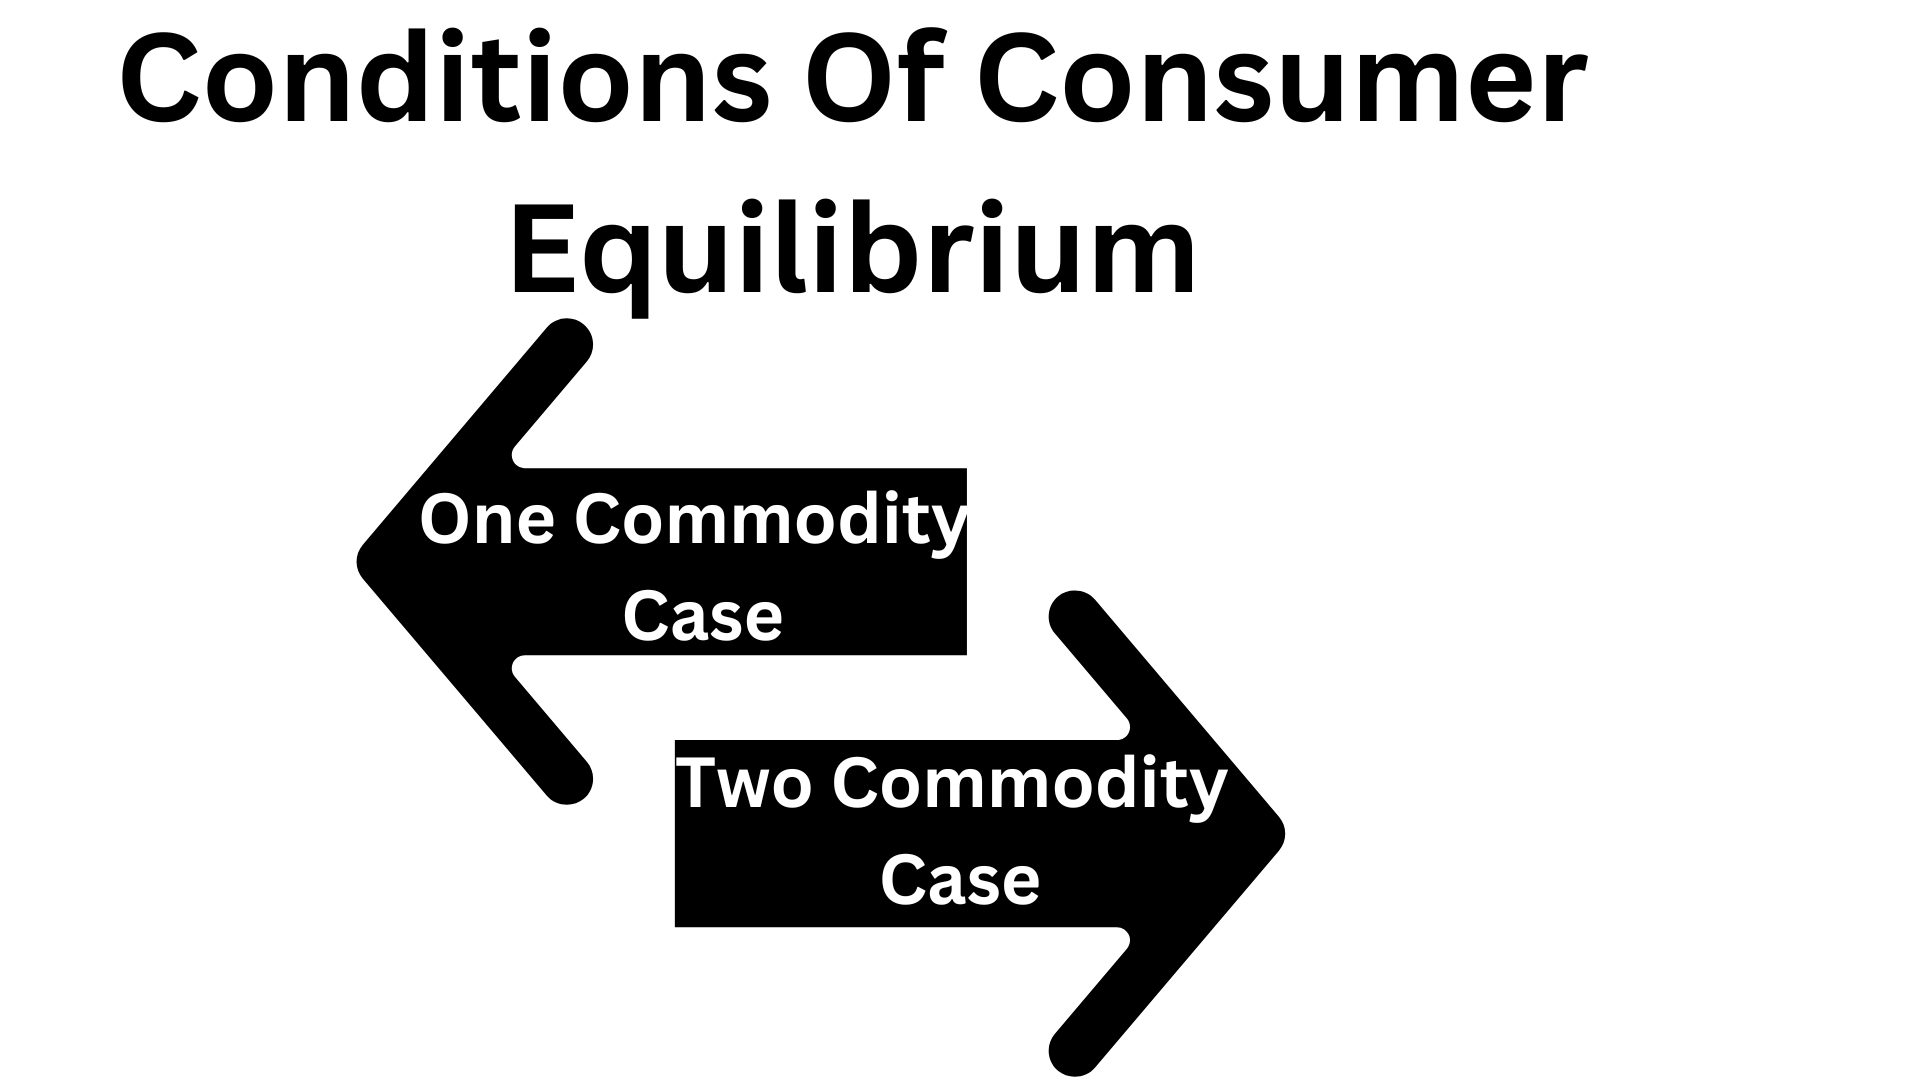 case study questions on consumer equilibrium class 11